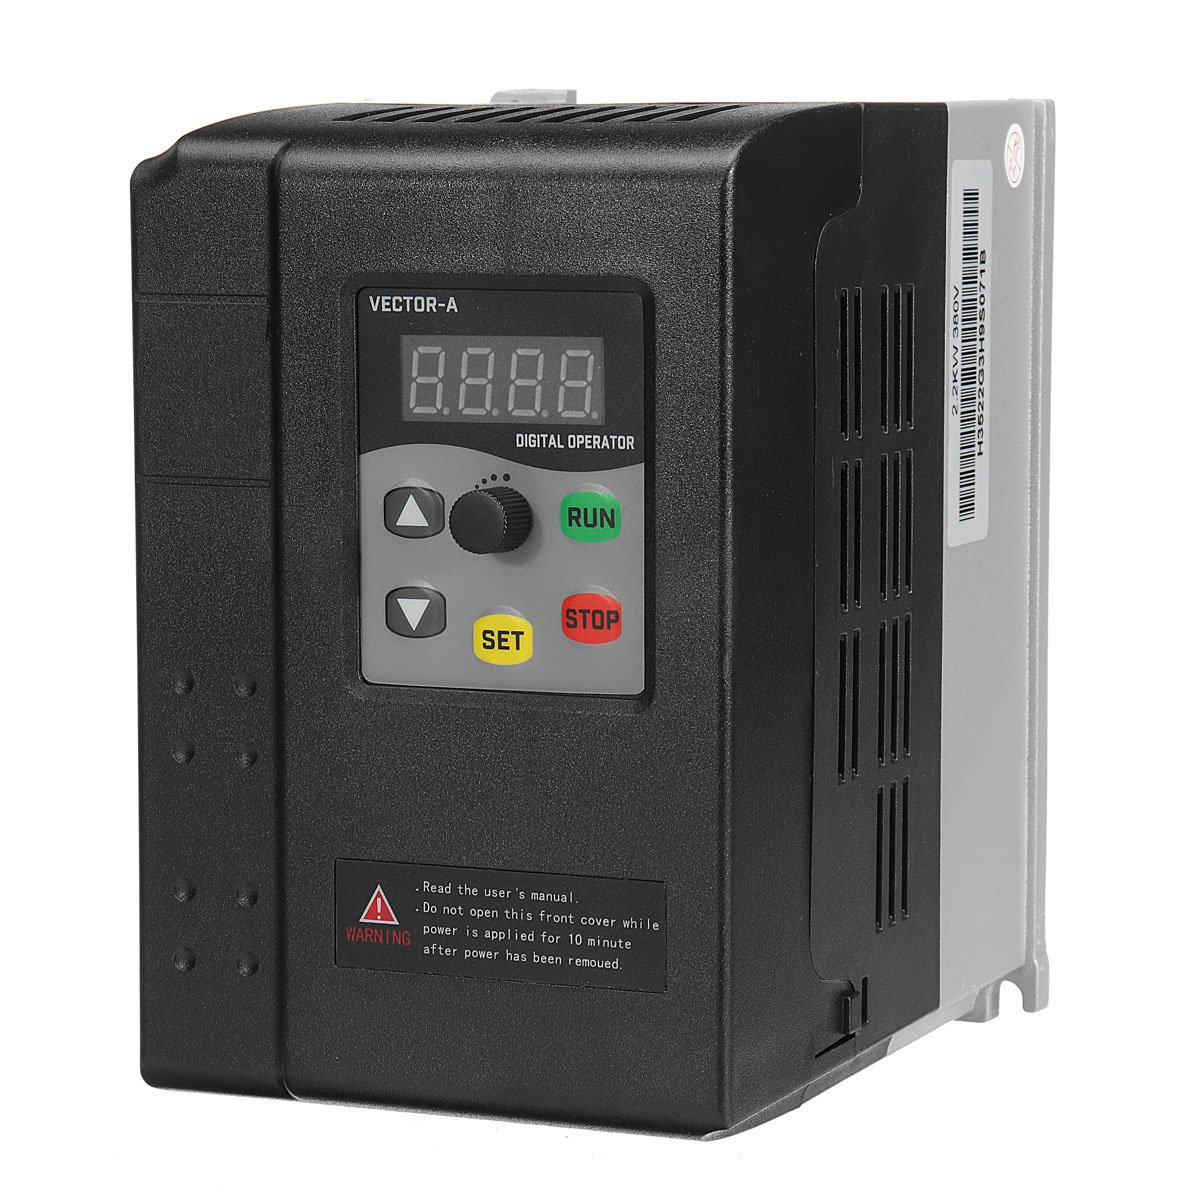 Find 2 2KW 3HP 380V 5A 3 To 3 Phase Variable Frequency Inverter Motor Drive VSD VFD for Sale on Gipsybee.com with cryptocurrencies